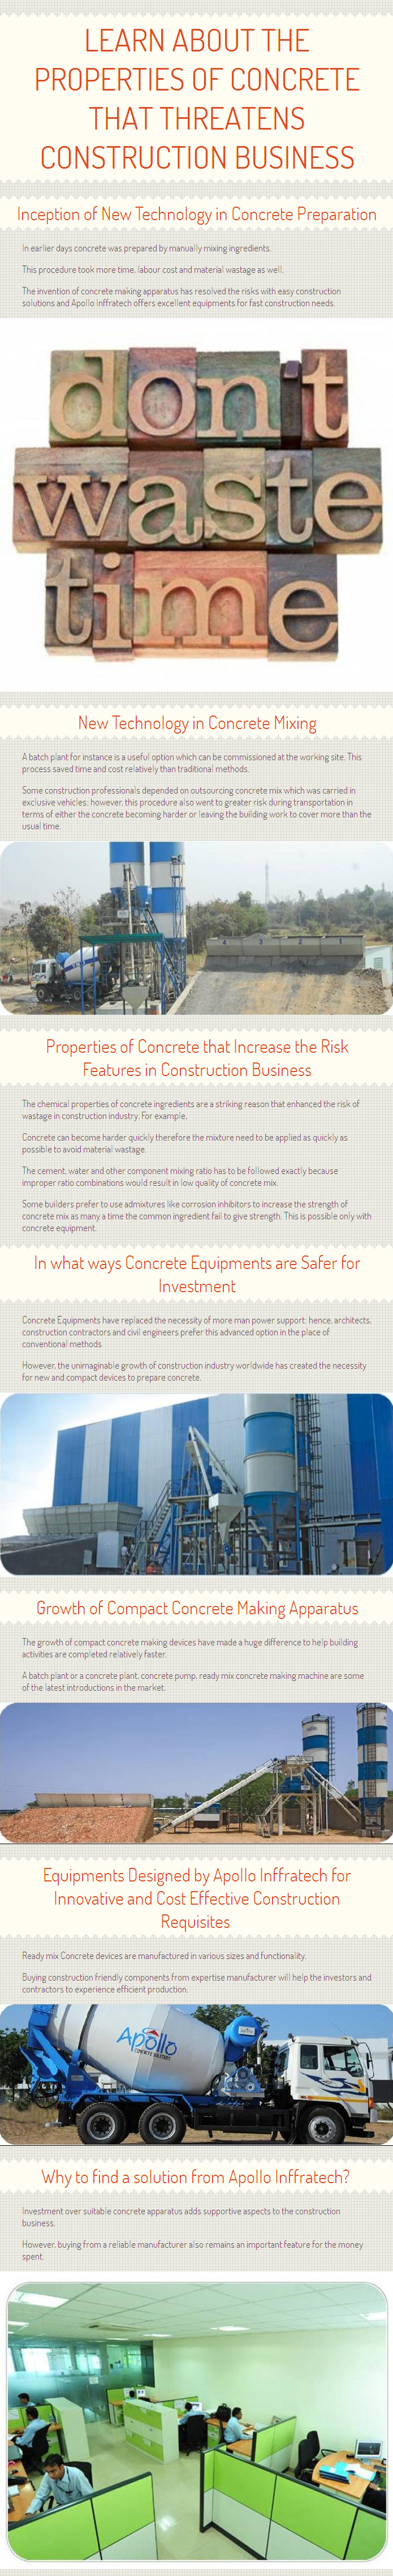 Learn about the Properties of Concrete that Threatens Construction Business